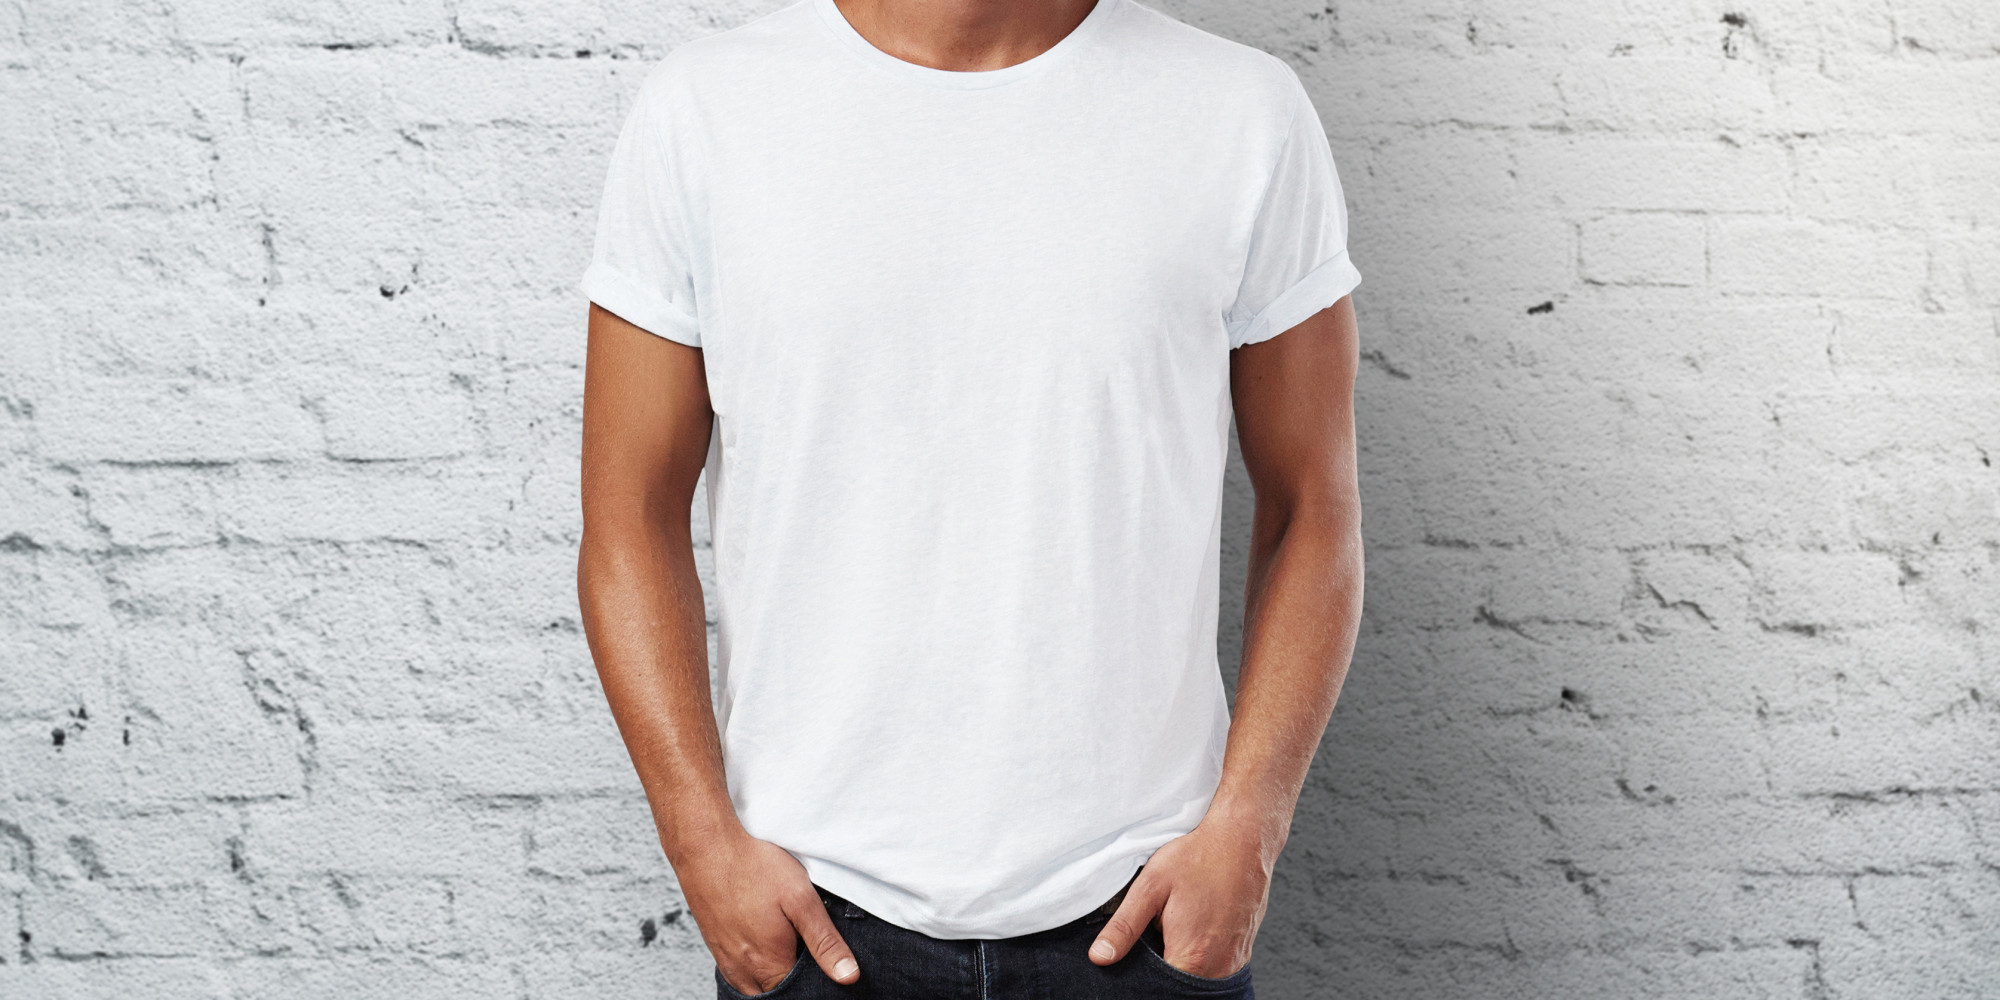 Have cool look in with white t shirt